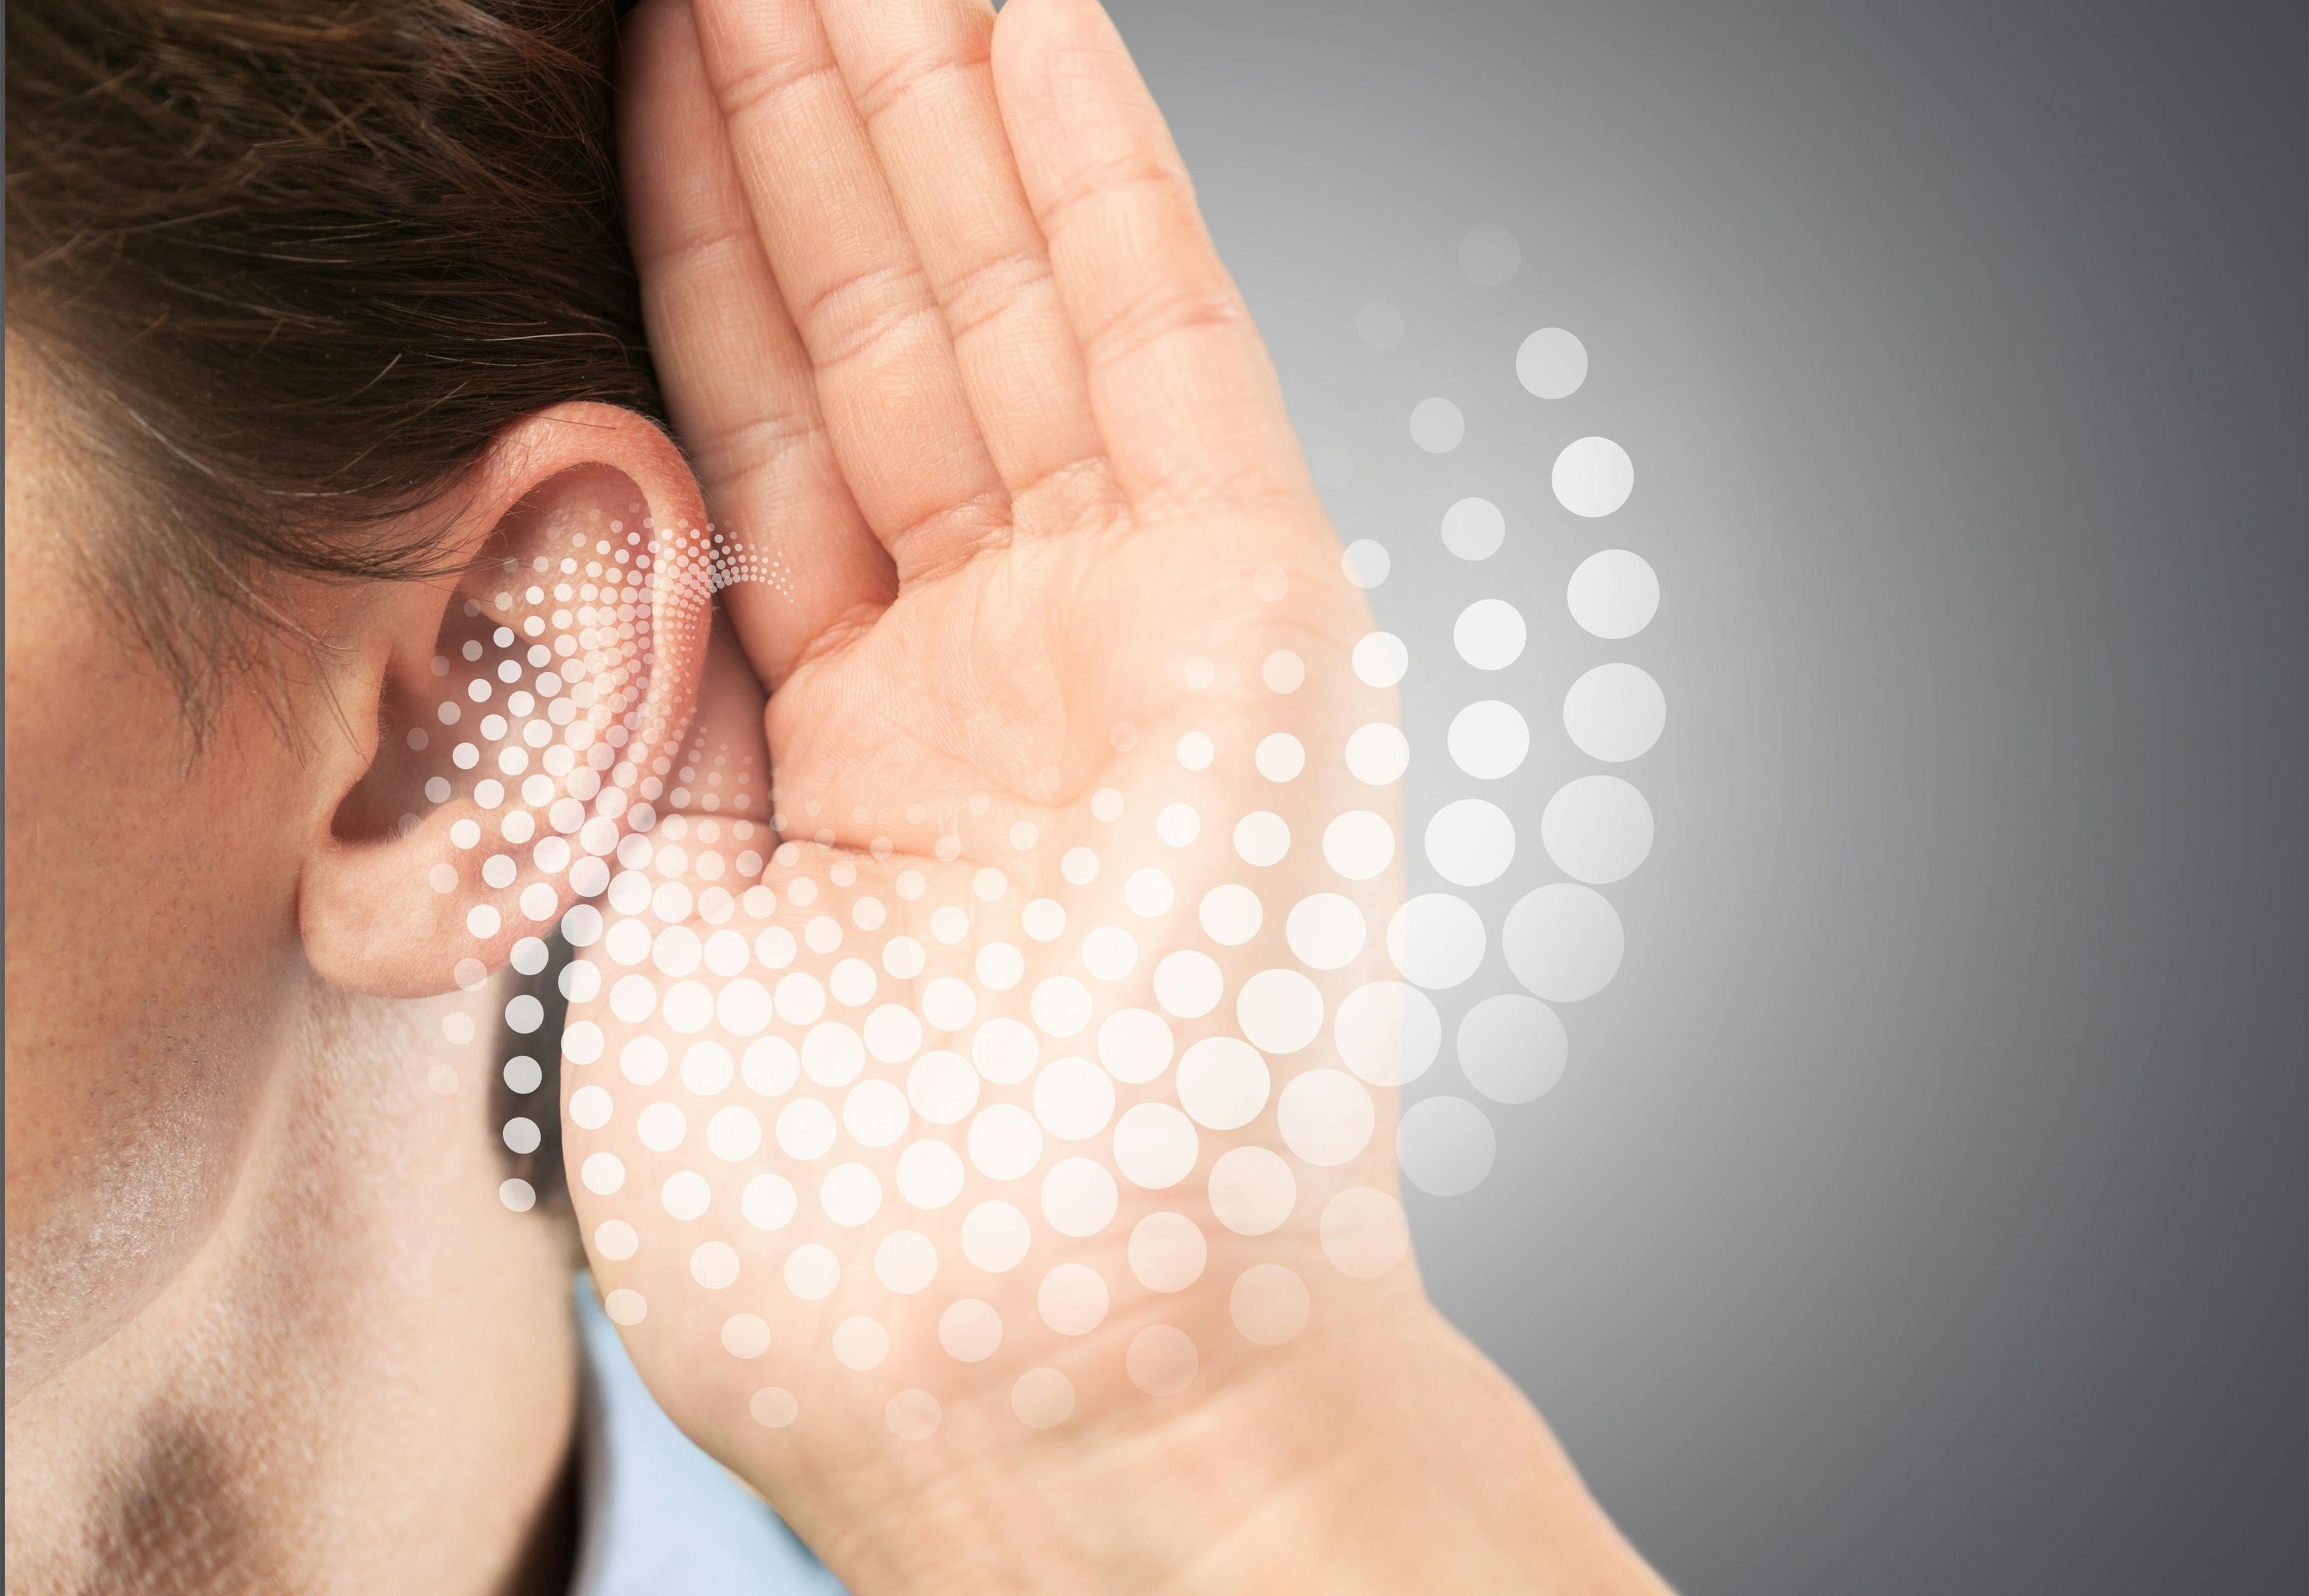 OTC Hearing Aids Increase Accessibility for Patients with Mild to Moderate Hearing Loss